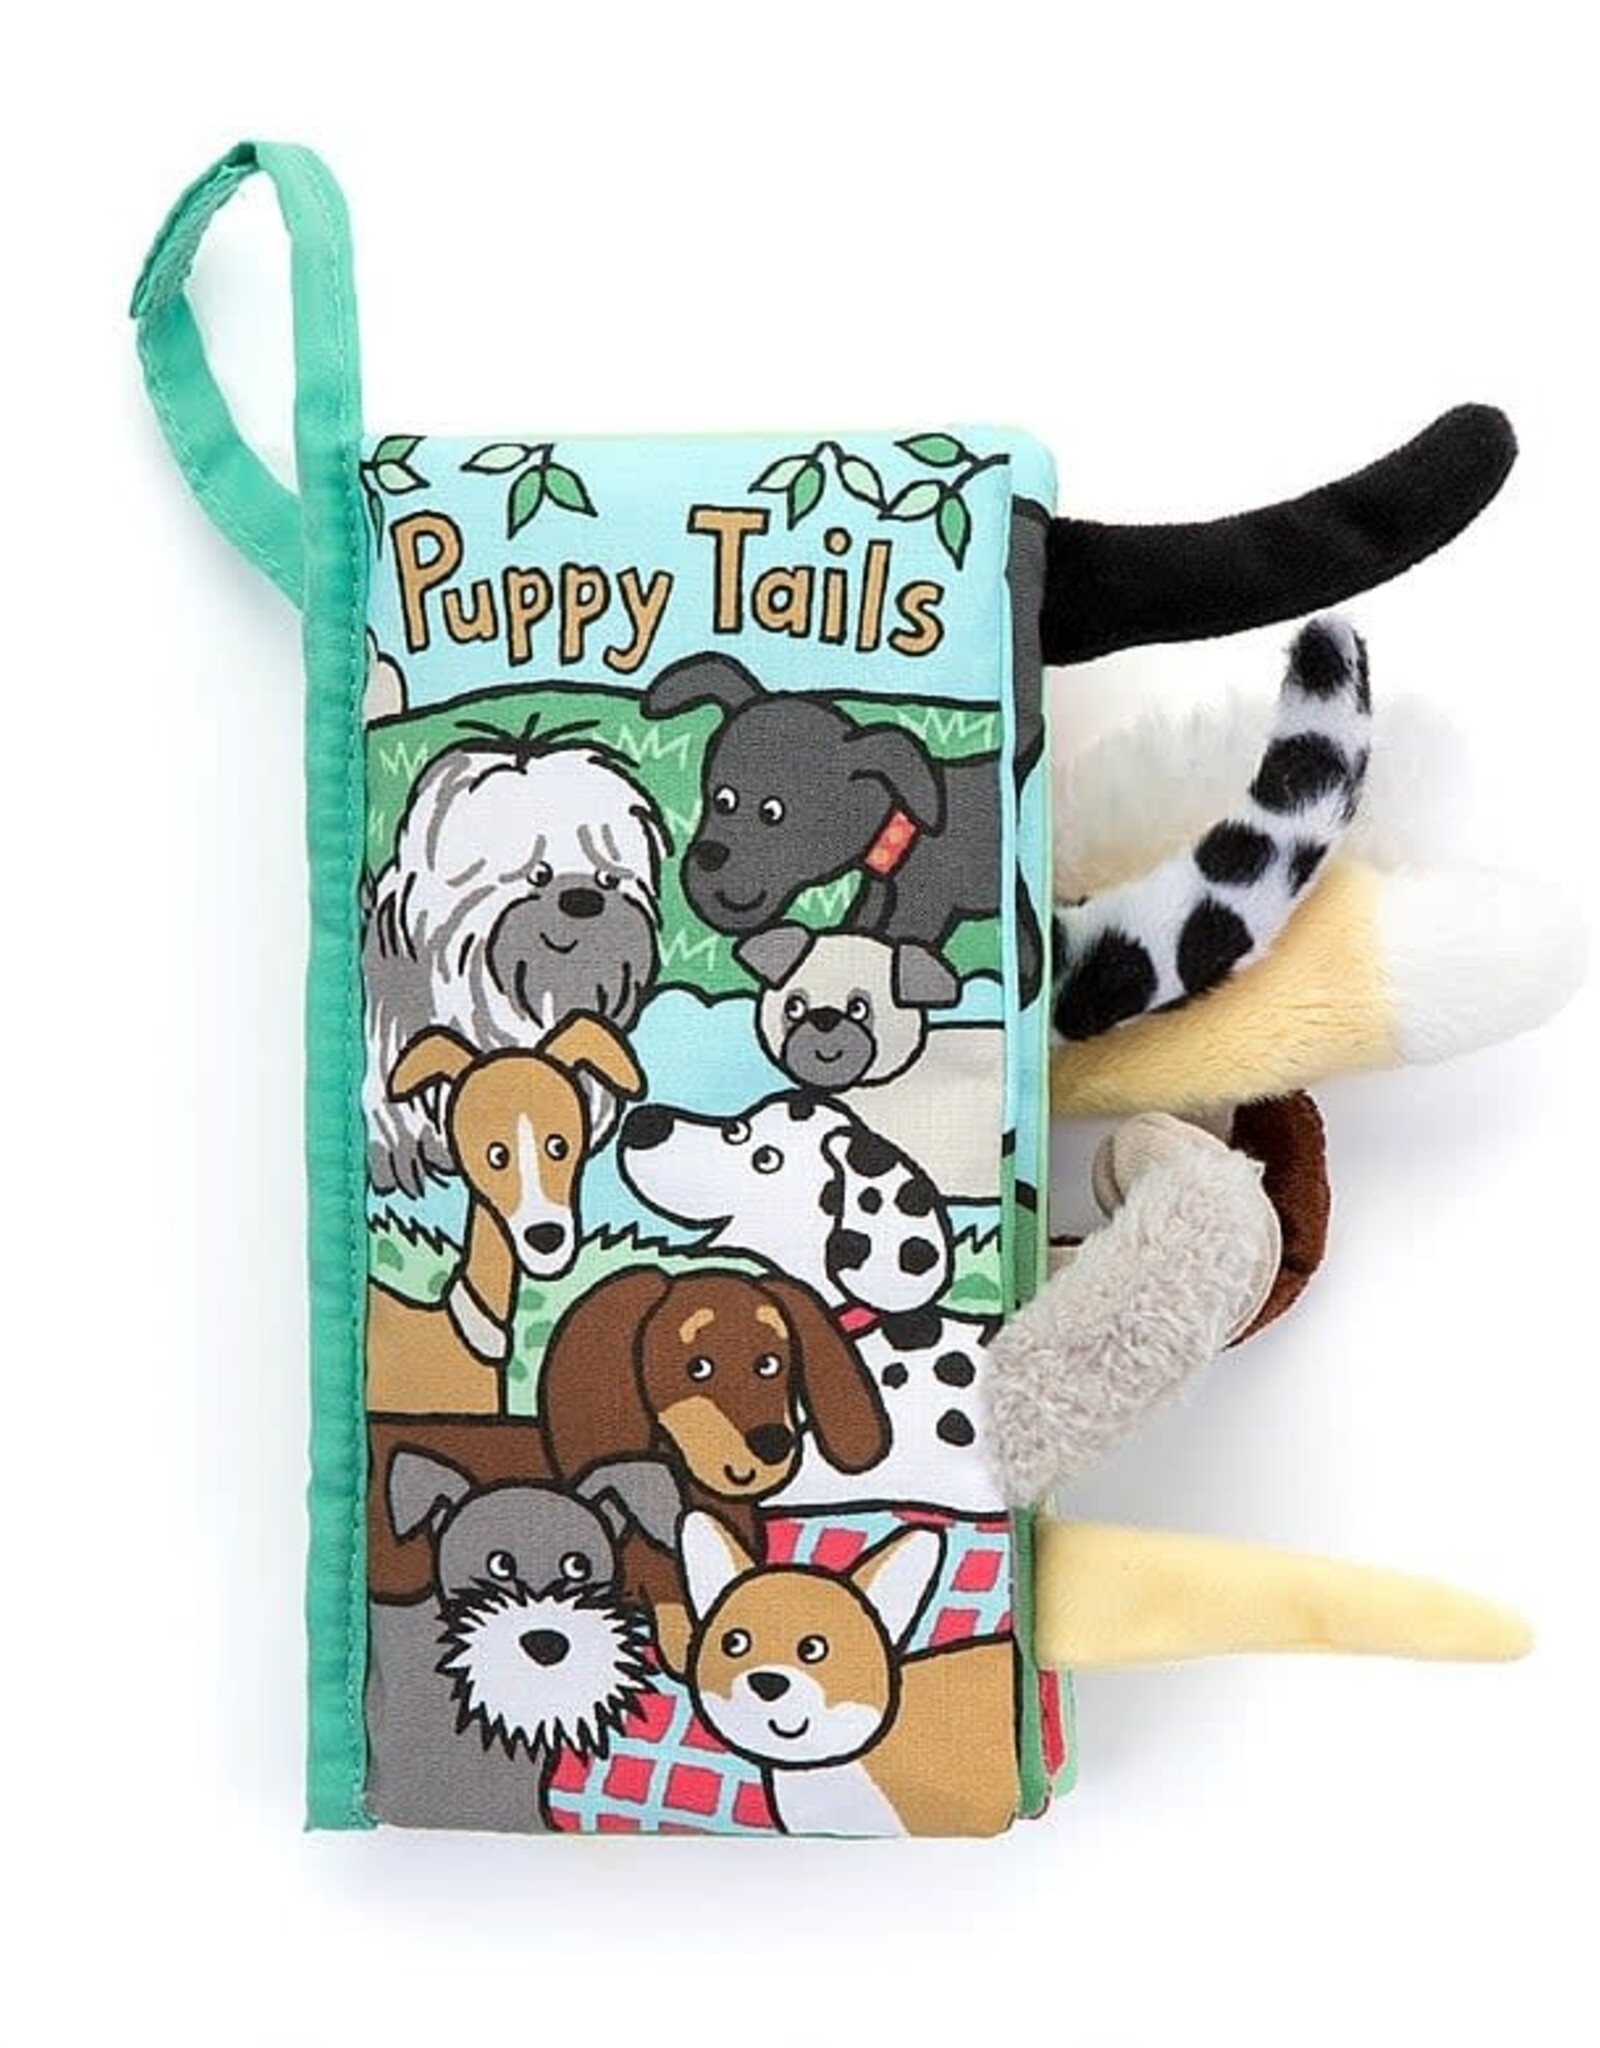 Jellycat Puppy Tails fabric book